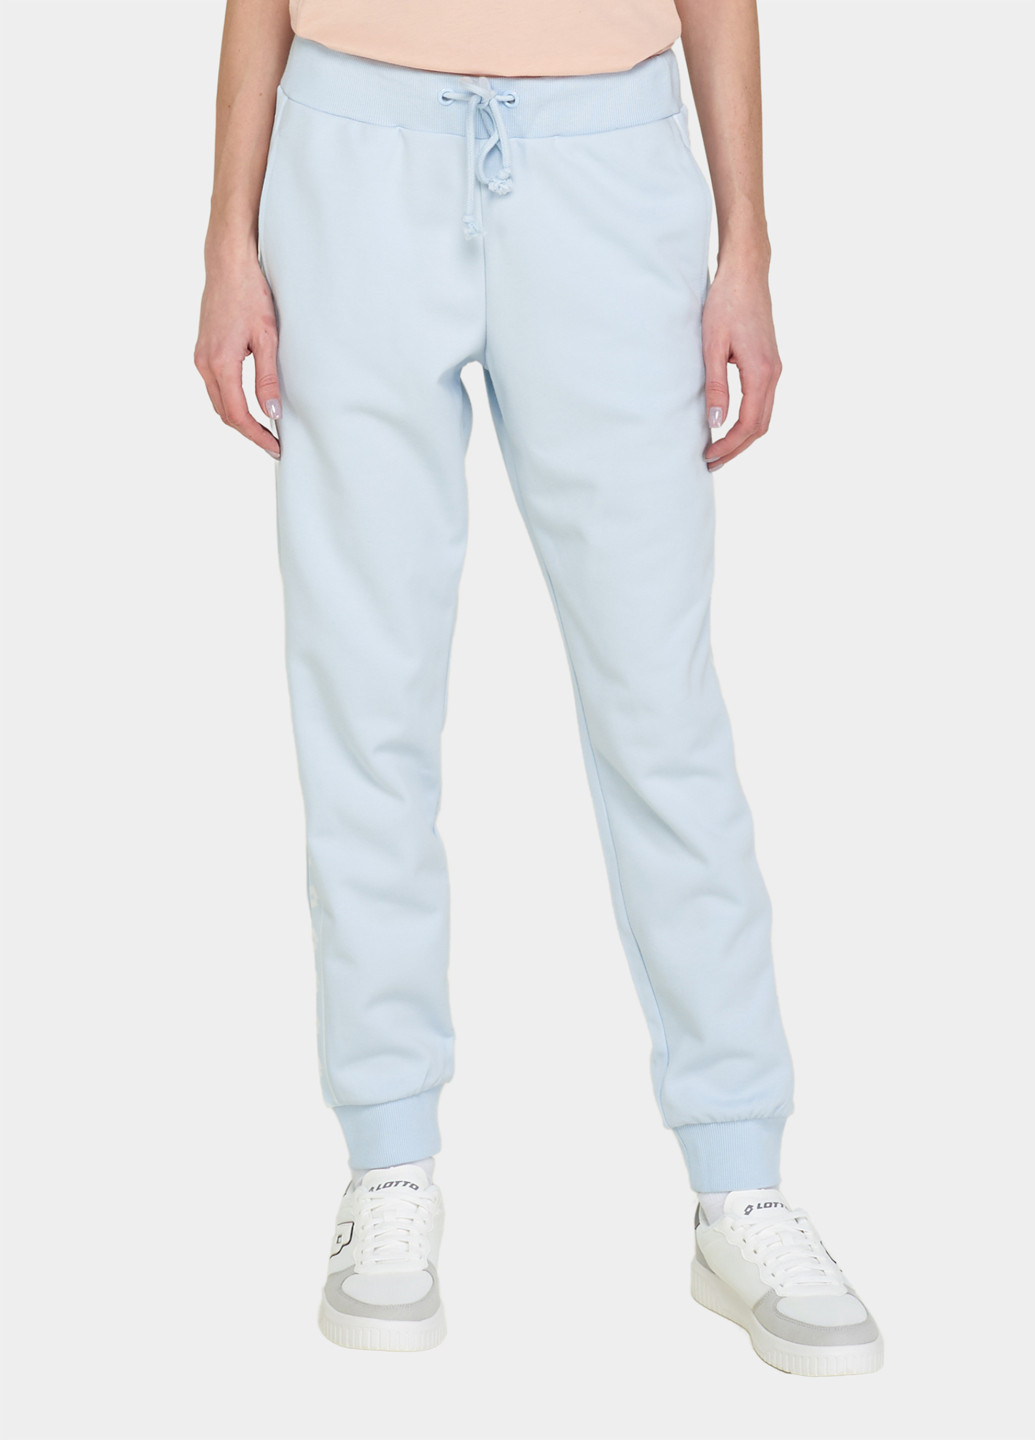 Брюки Lotto athletica due w v pant (282938024)